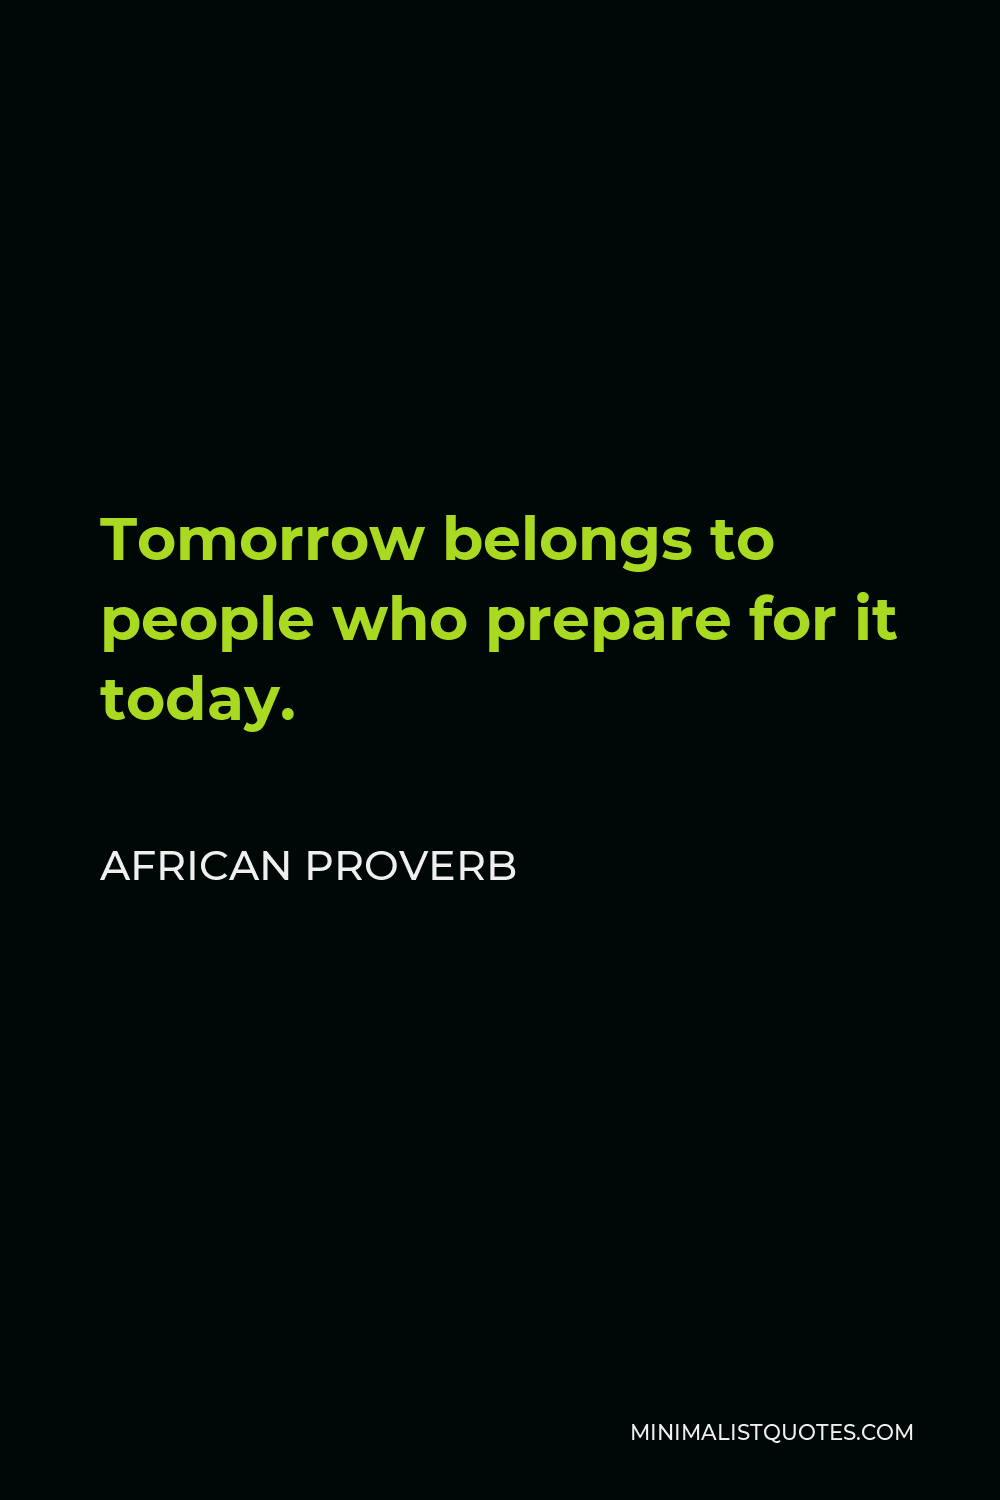 African Proverb Quote - Tomorrow belongs to people who prepare for it today.